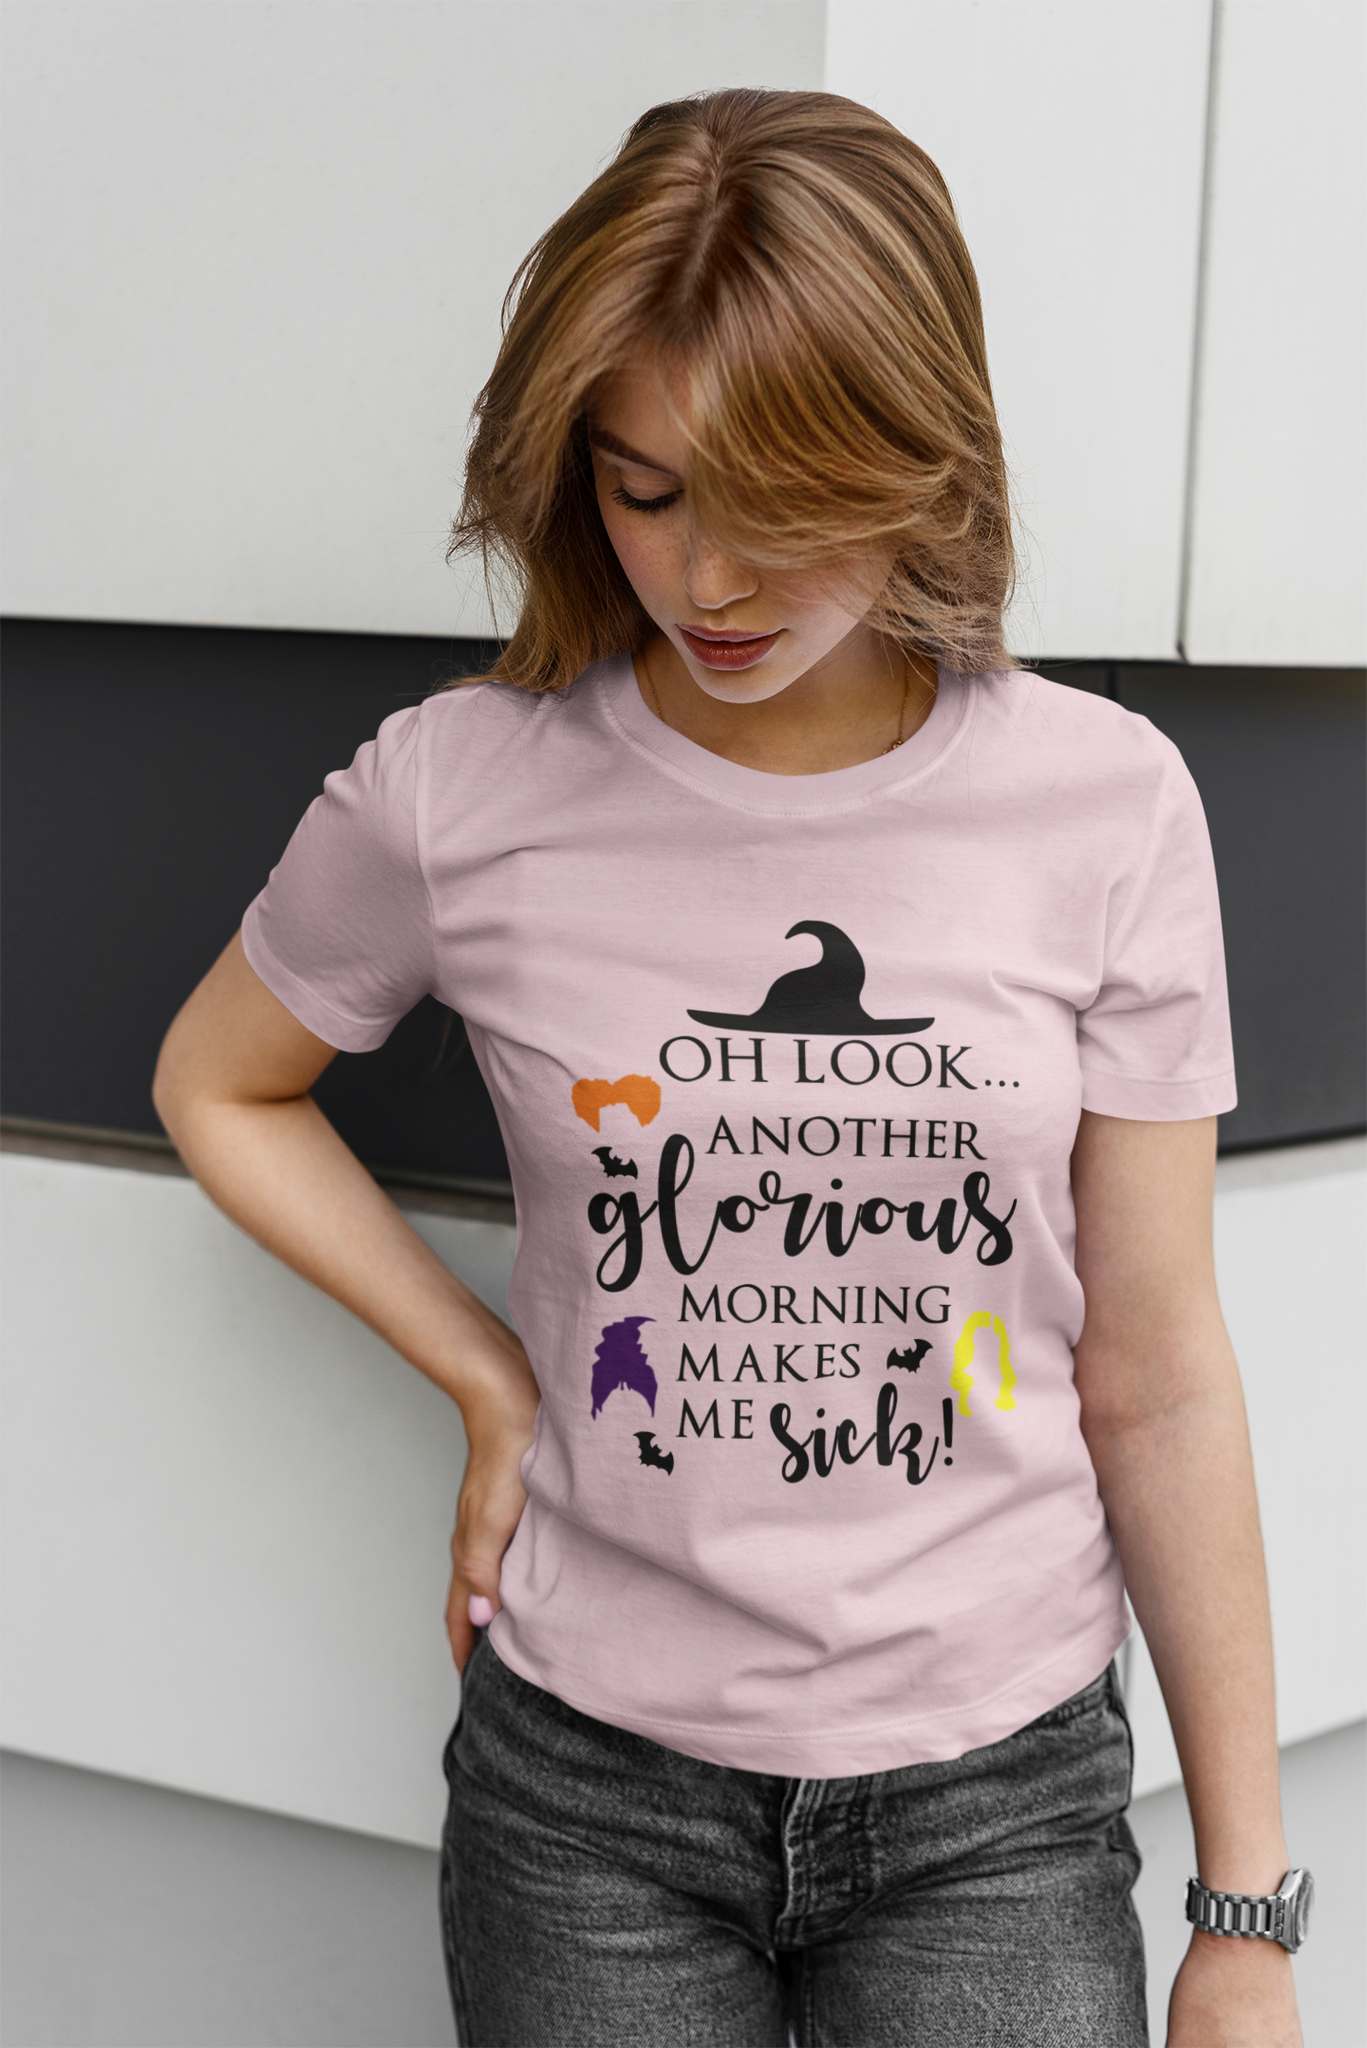 Hocus Pocus T Shirt, Oh Look Another Glorious Morning Makes Me Sick Shirt, Sanderson Sisters Shirt, Halloween Gifts